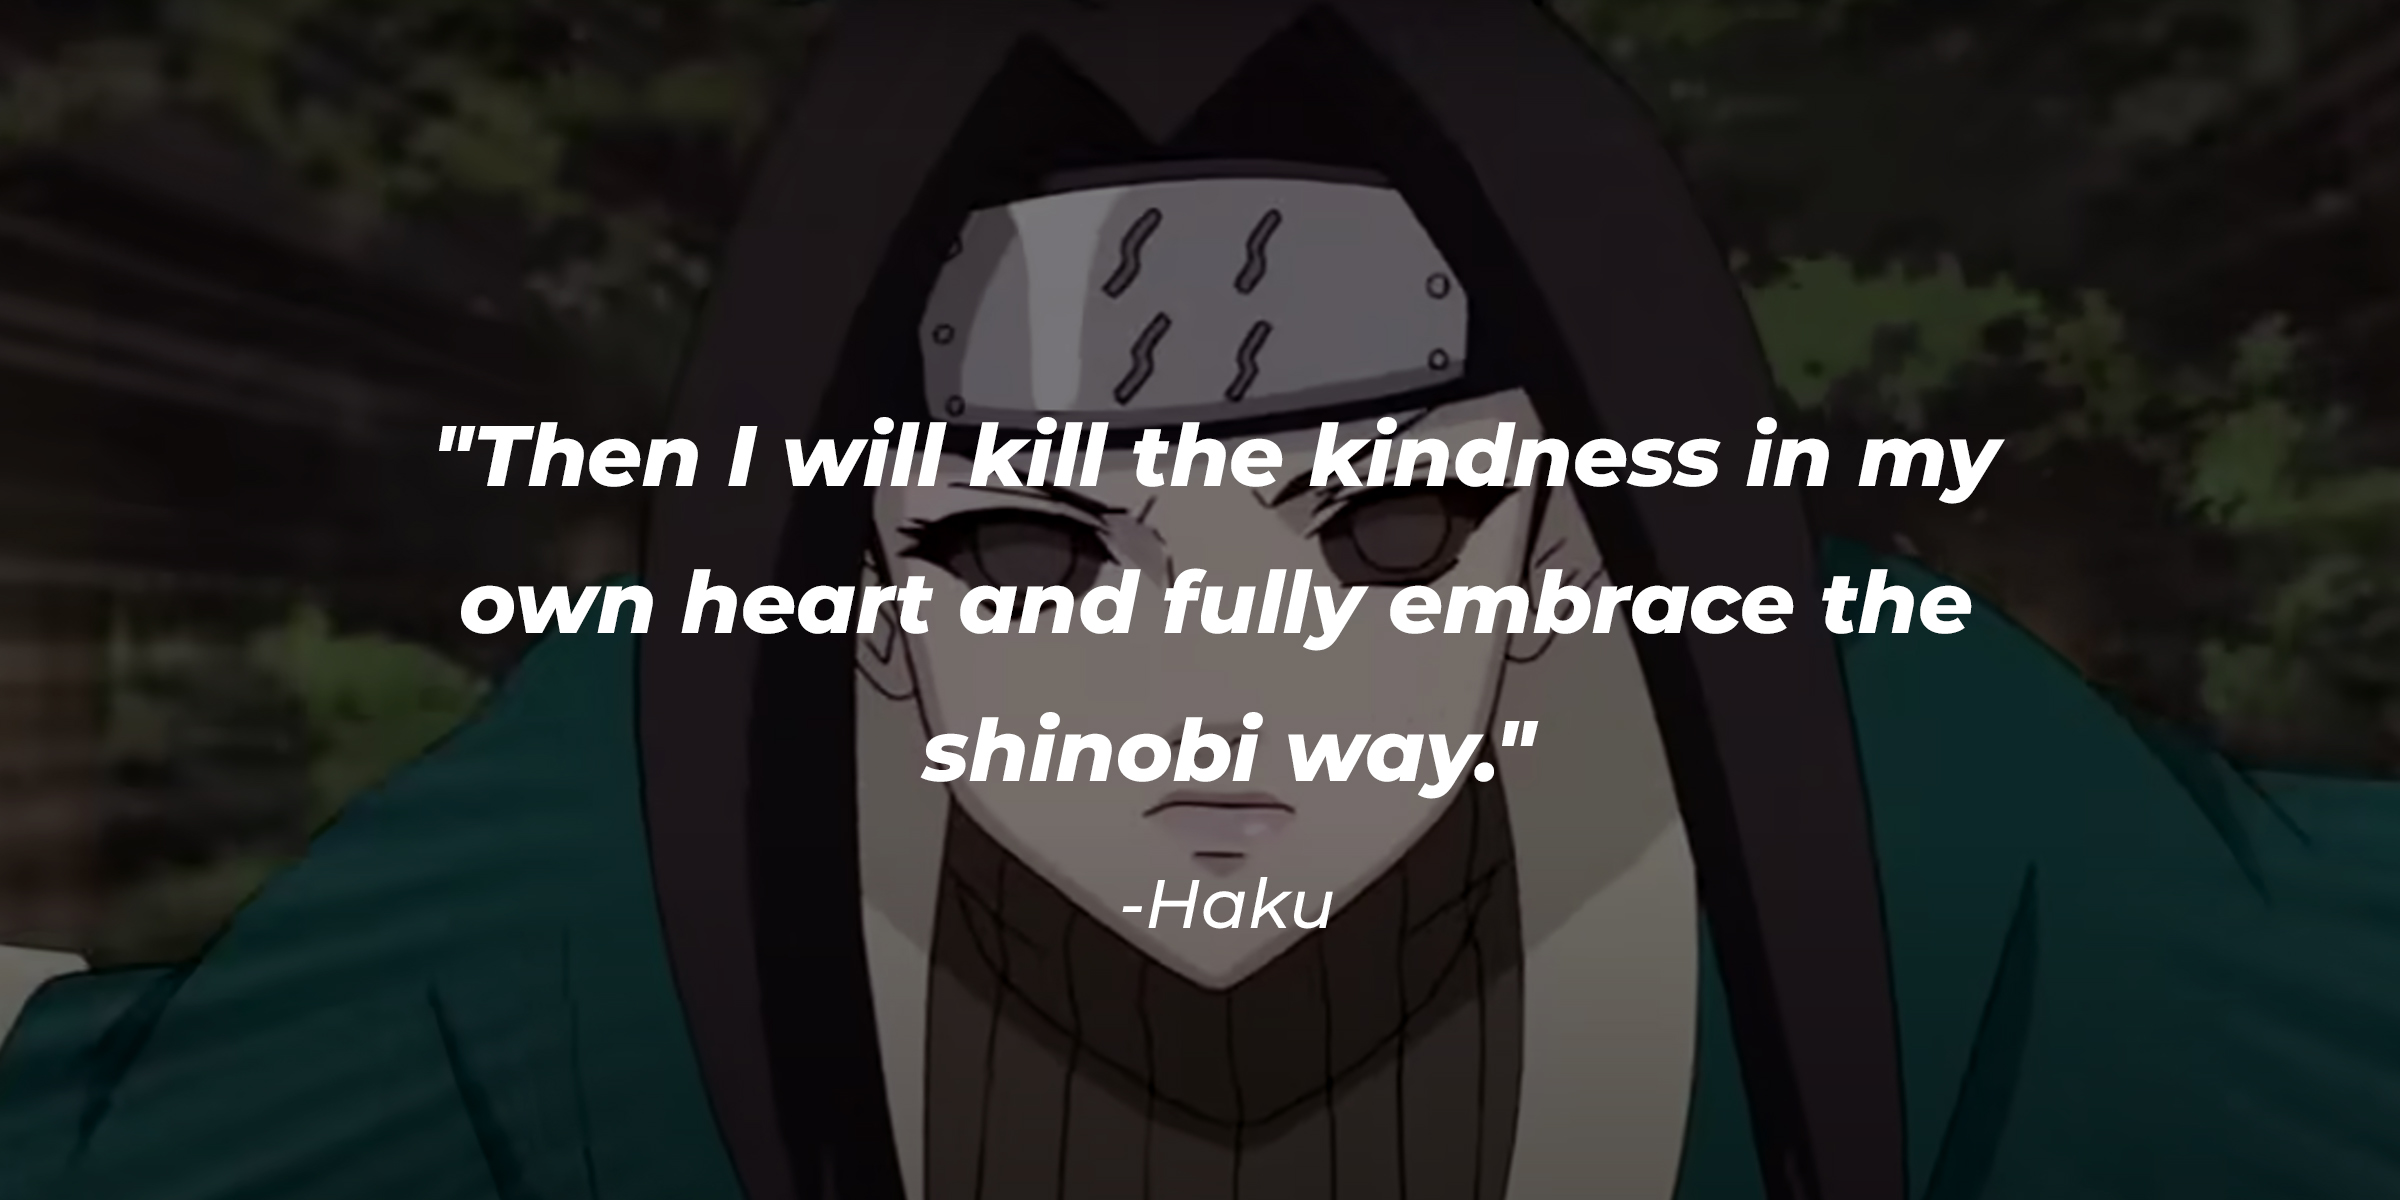 Haku, with his quote: “Then I will kill the kindness in my own heart and fully embrace the shinobi way.” | Source: facebook.com/narutoofficialsns